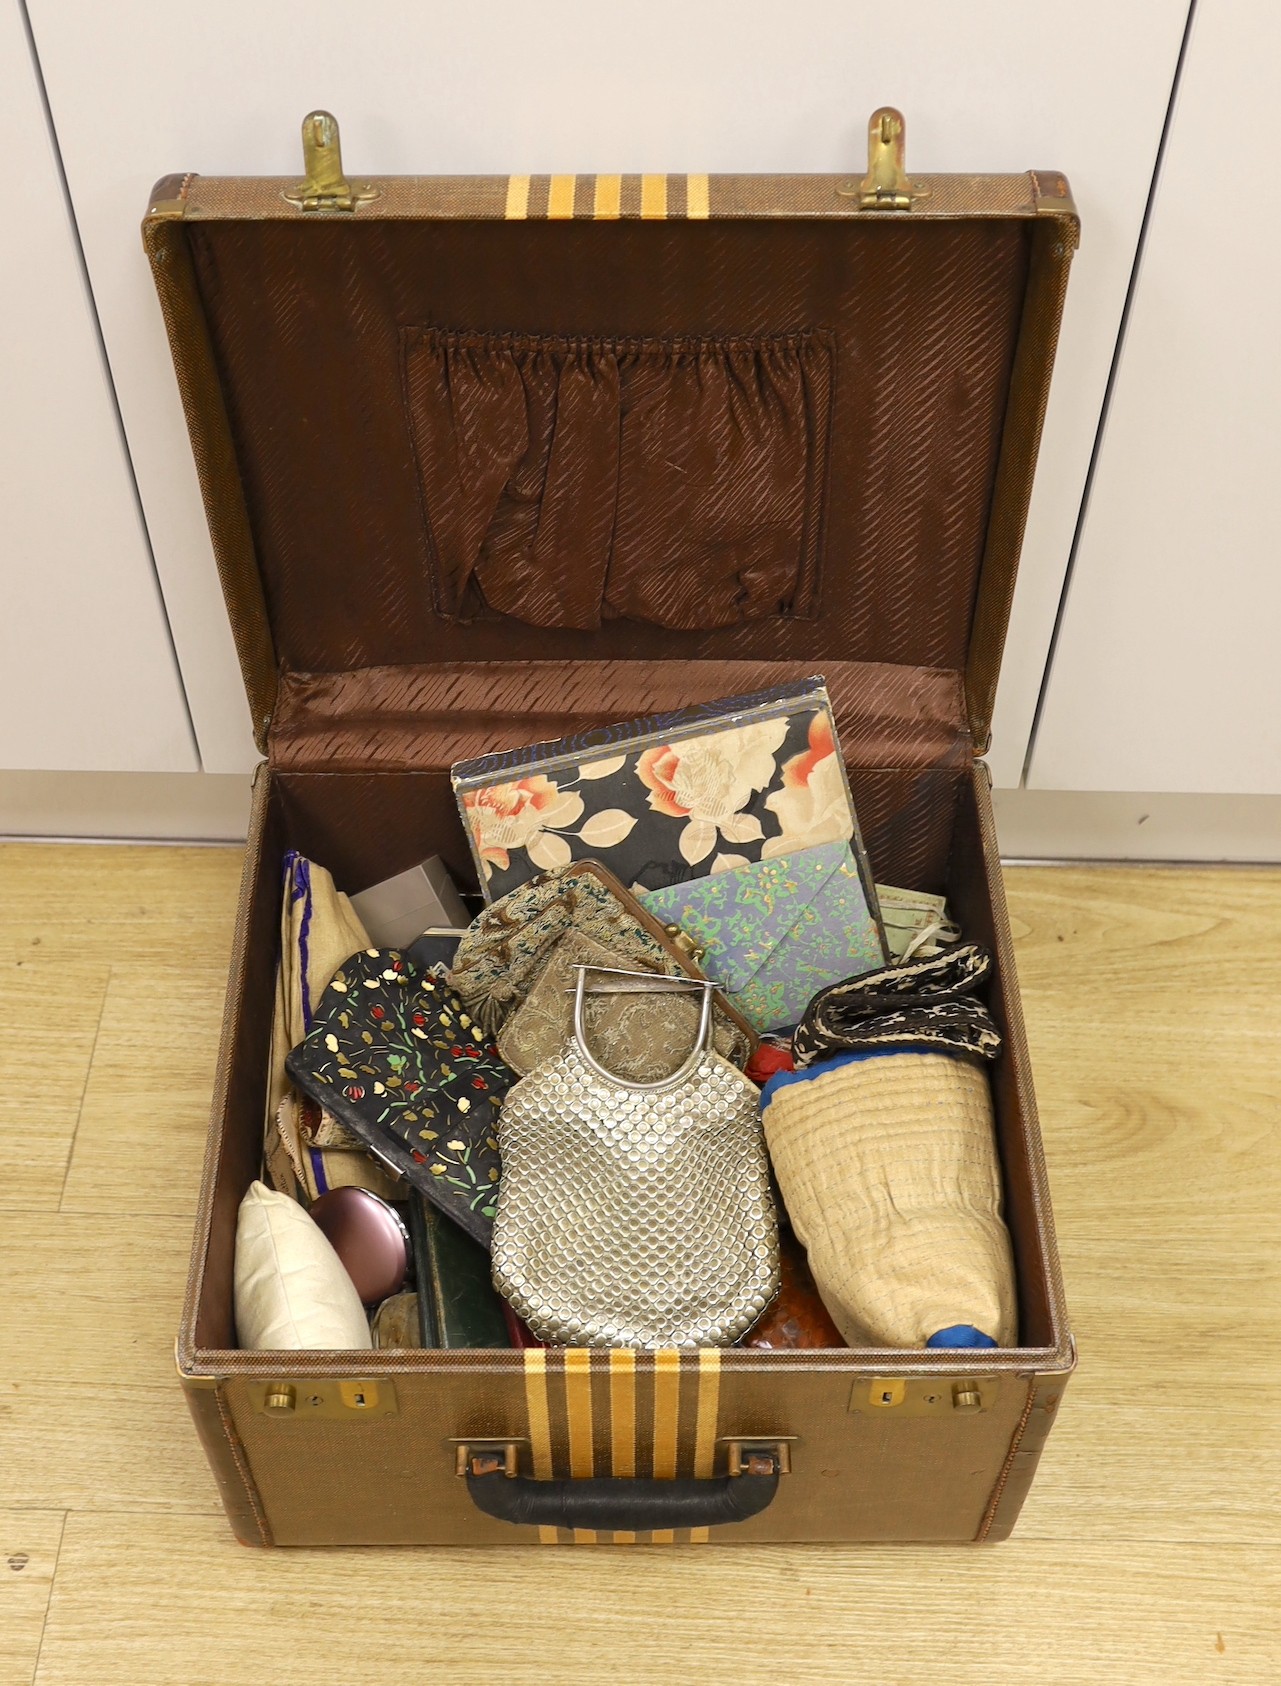 A suitcase containing a collection of late 19th century leather sewing bags and containers, wooden darning mushrooms, etc